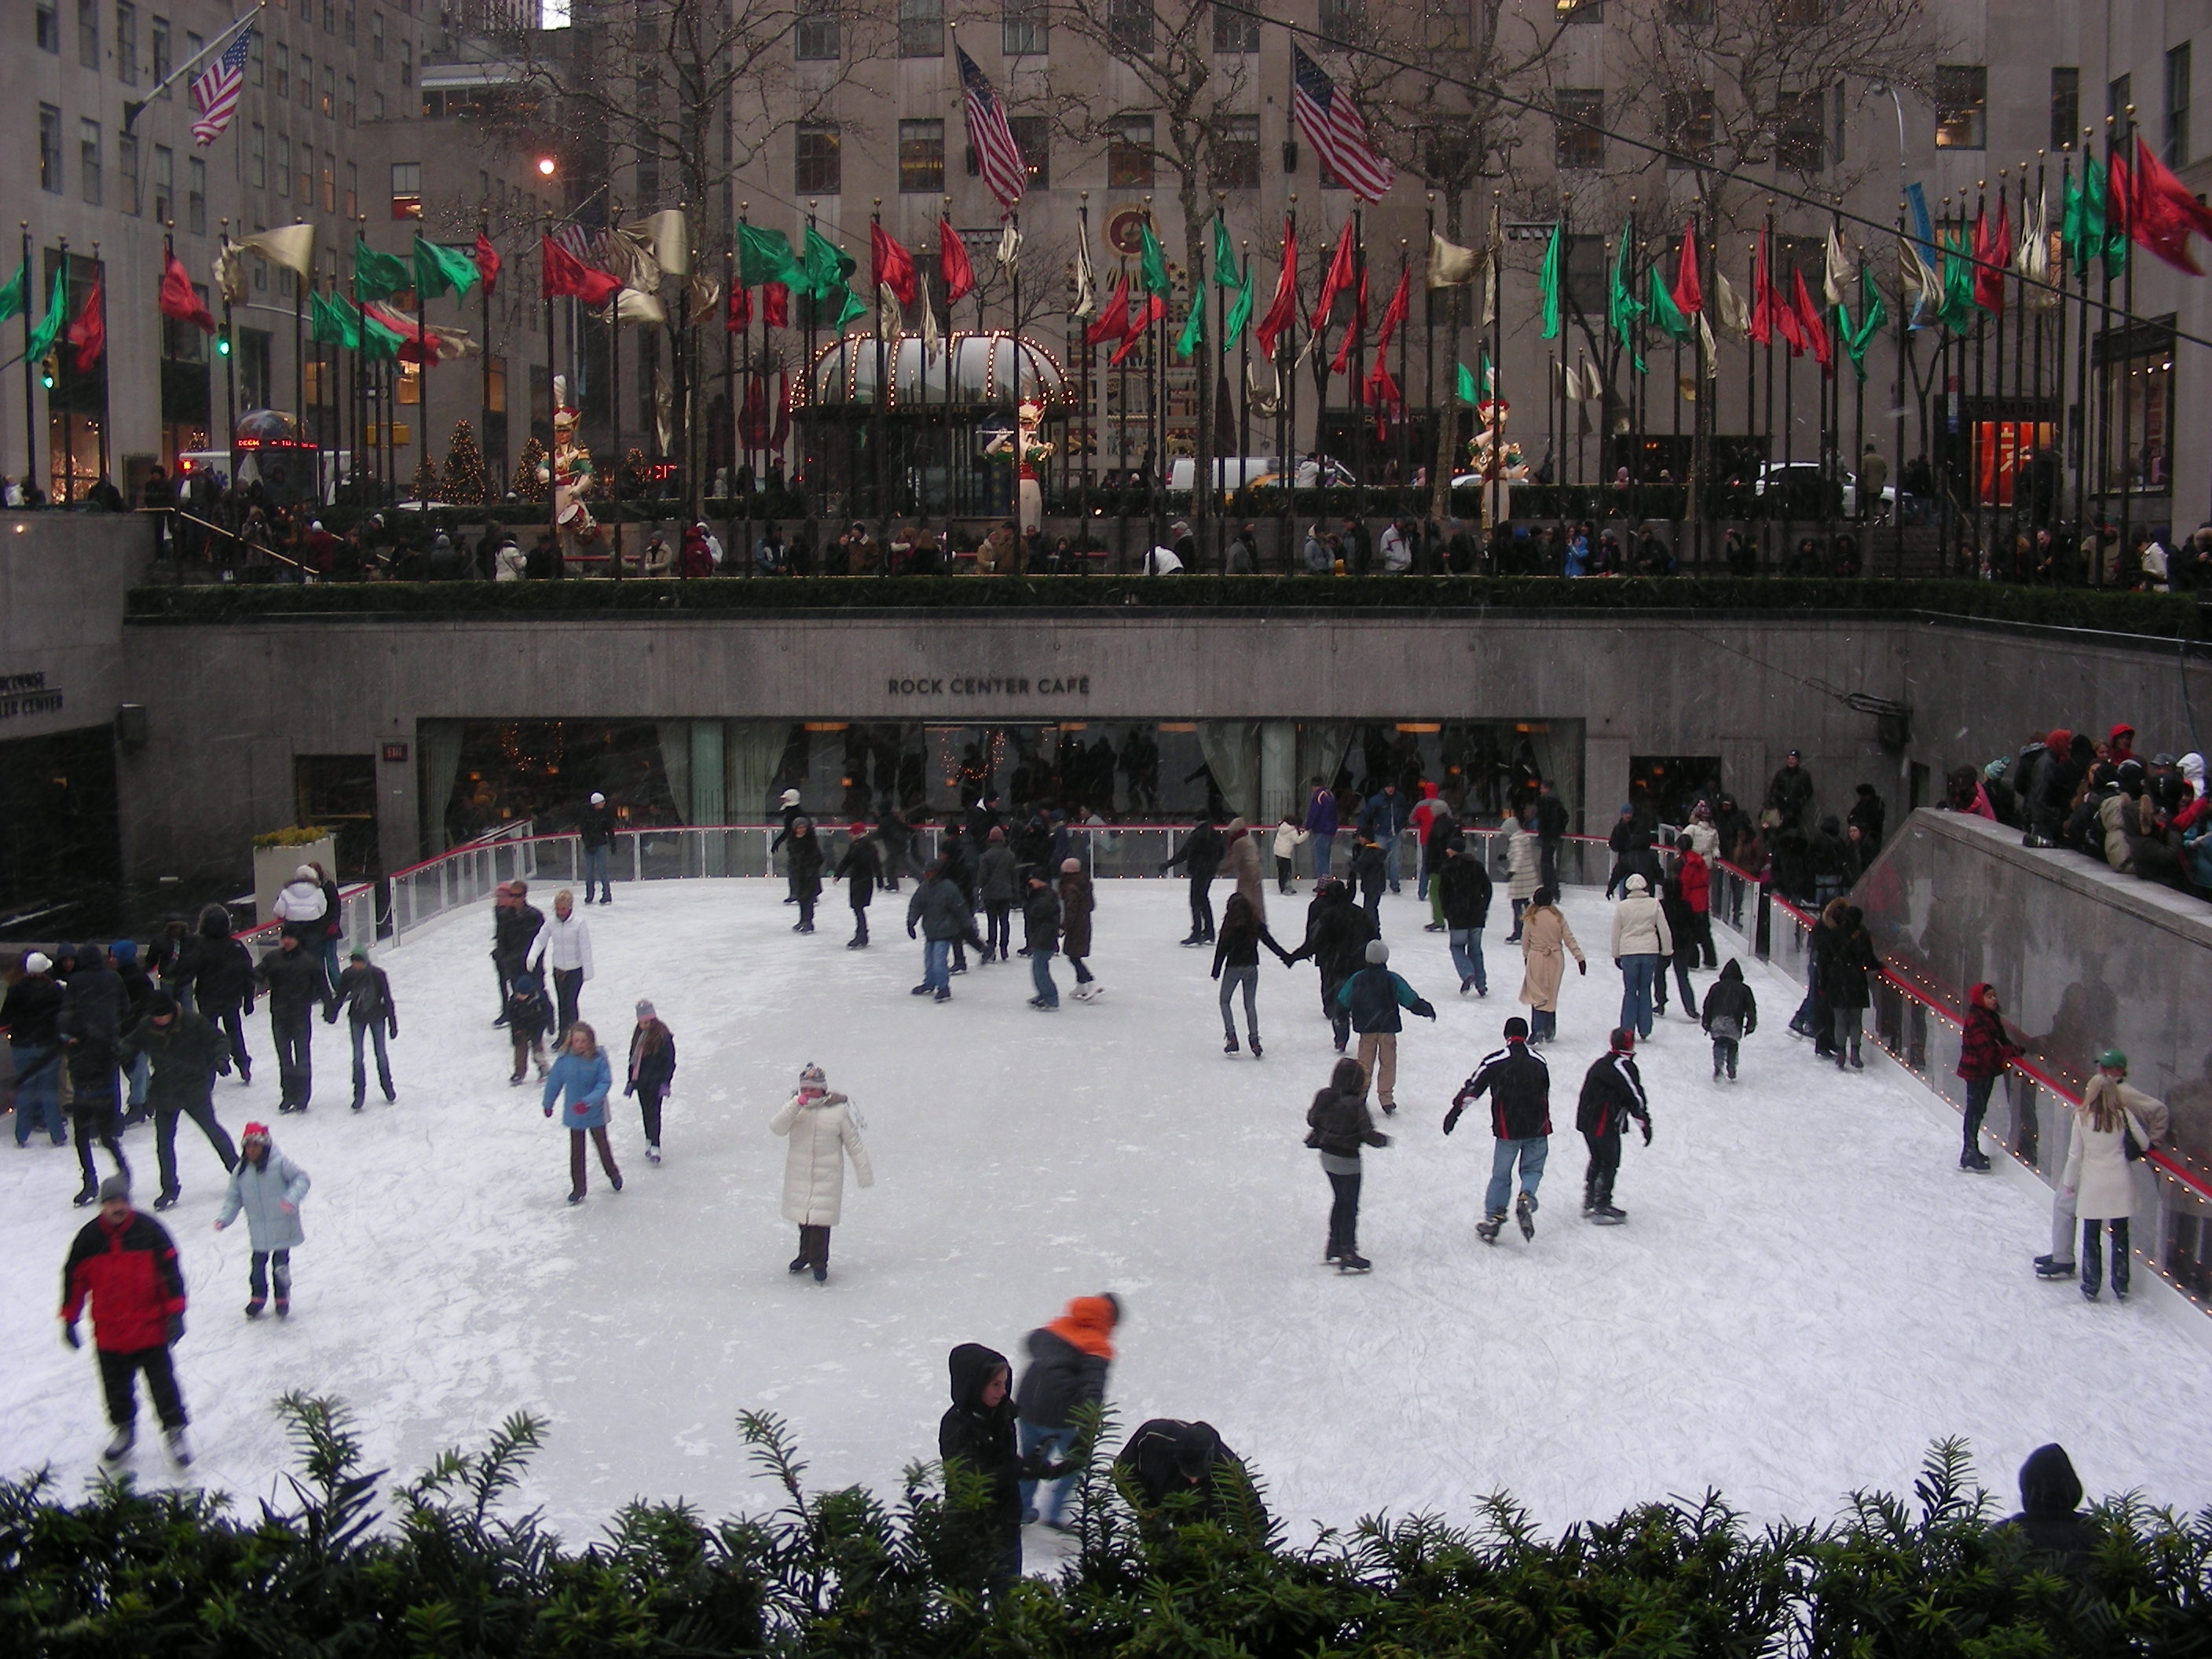 Ice rink at Rockefeller in New York. Photo by Alphacityguides